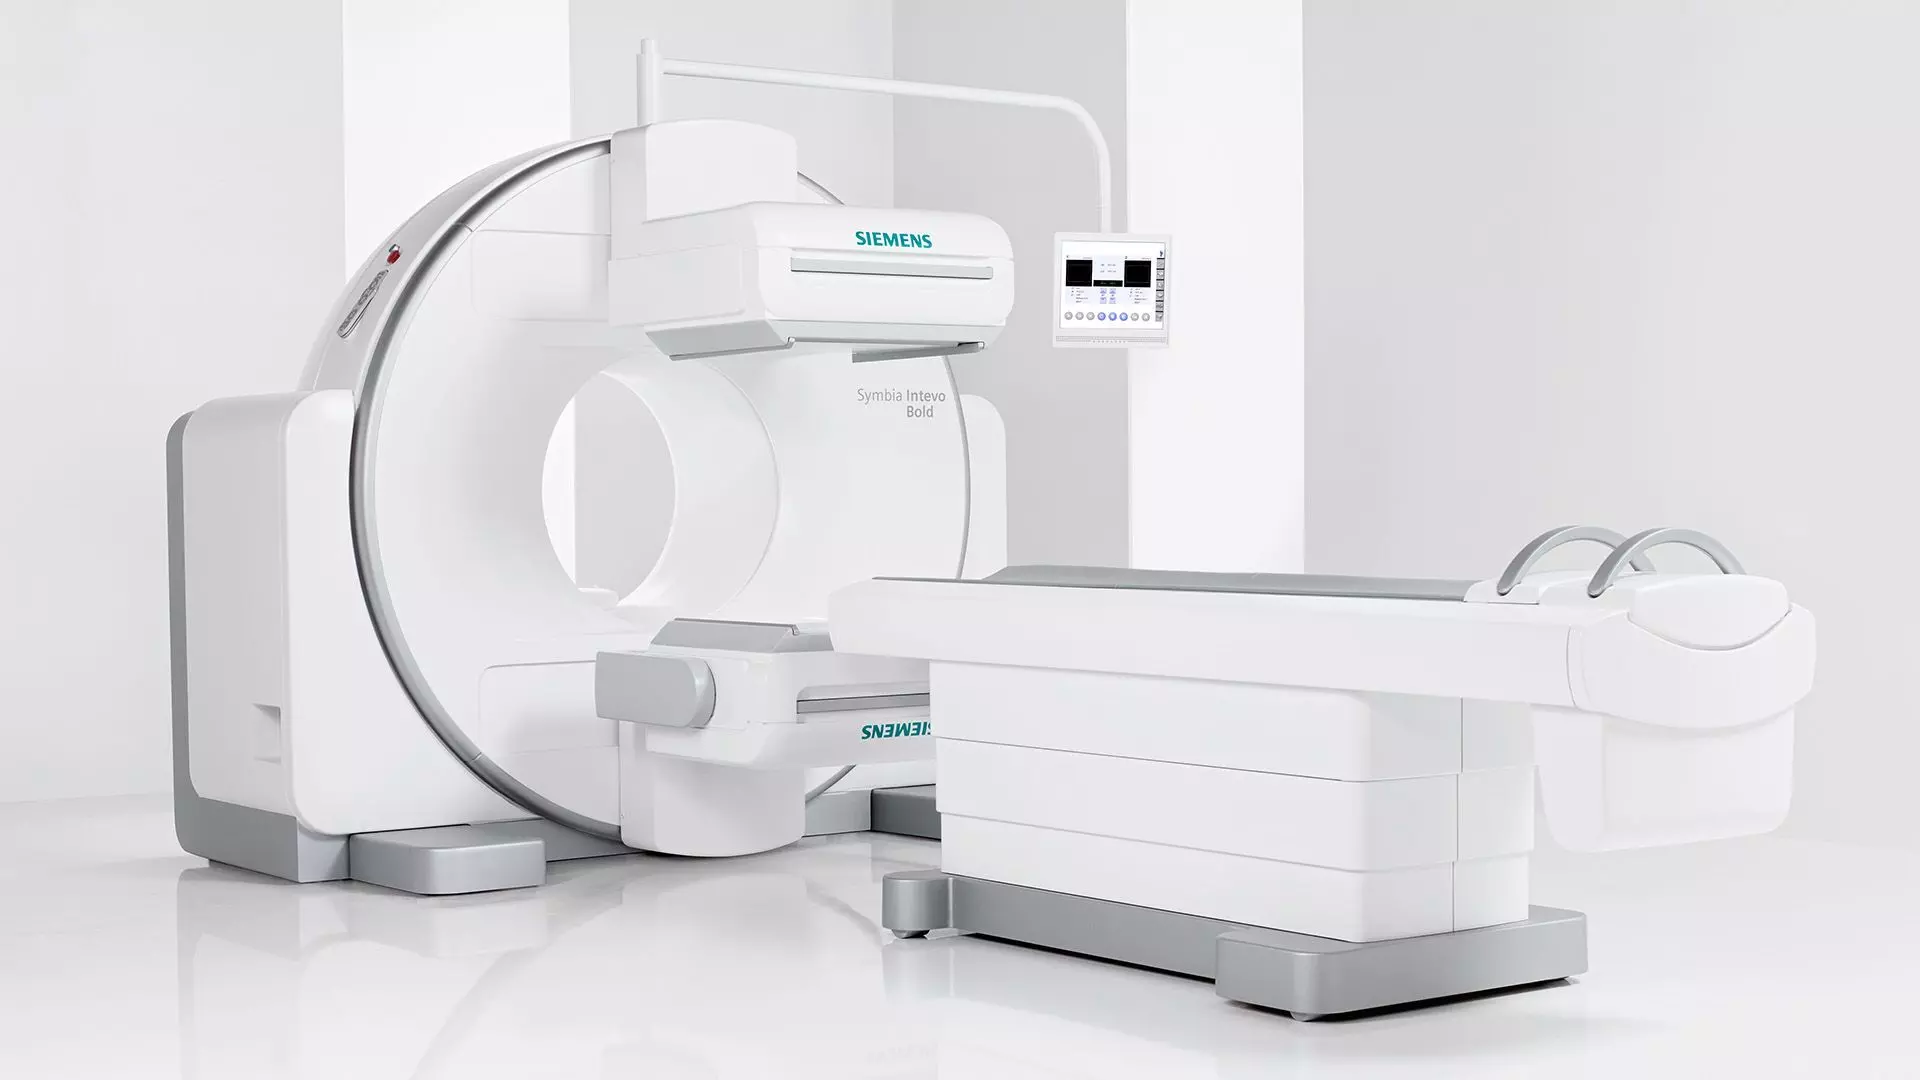 SPECT scan may predict. prognosis of hospitalized HF patients: Study